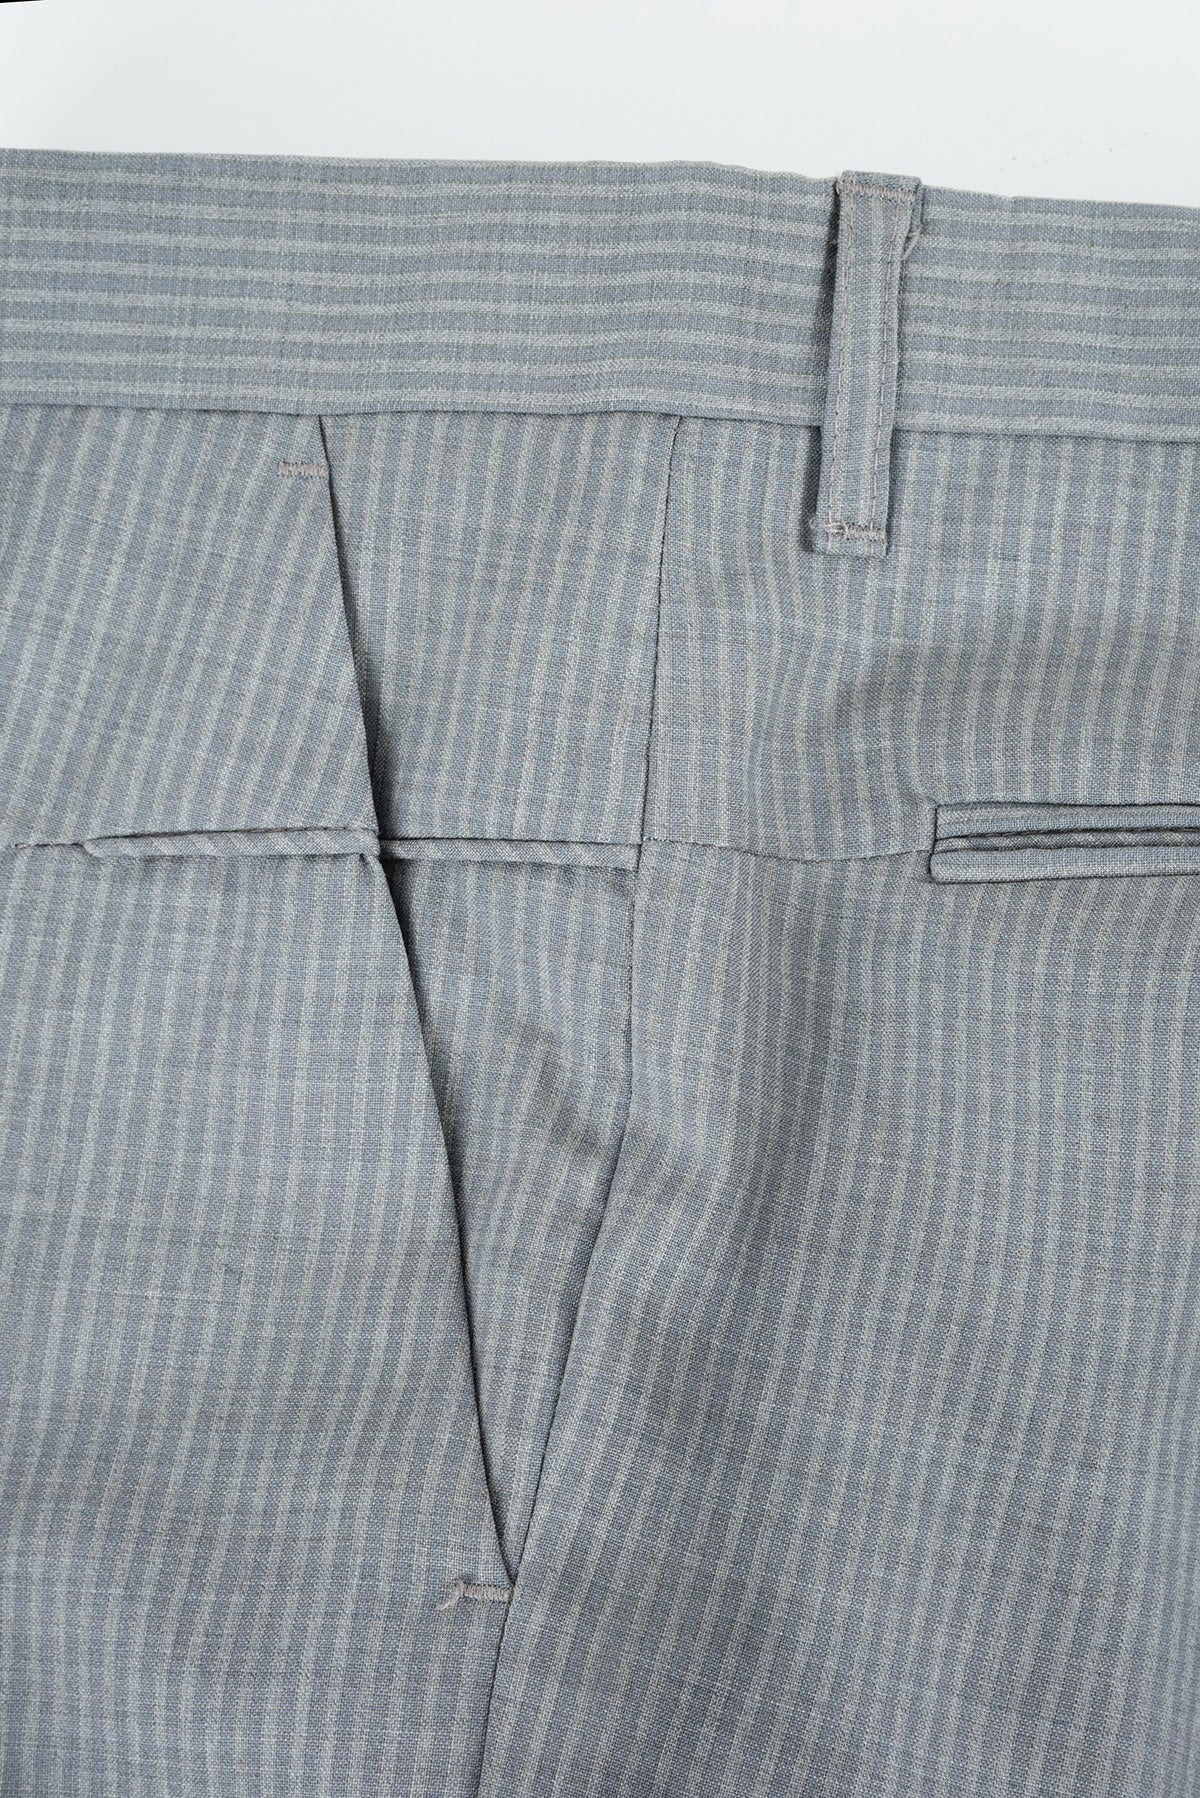 2008 S/S TROPICAL WOOL WIDE CUT TROUSERS WITH POCKET DETAILS